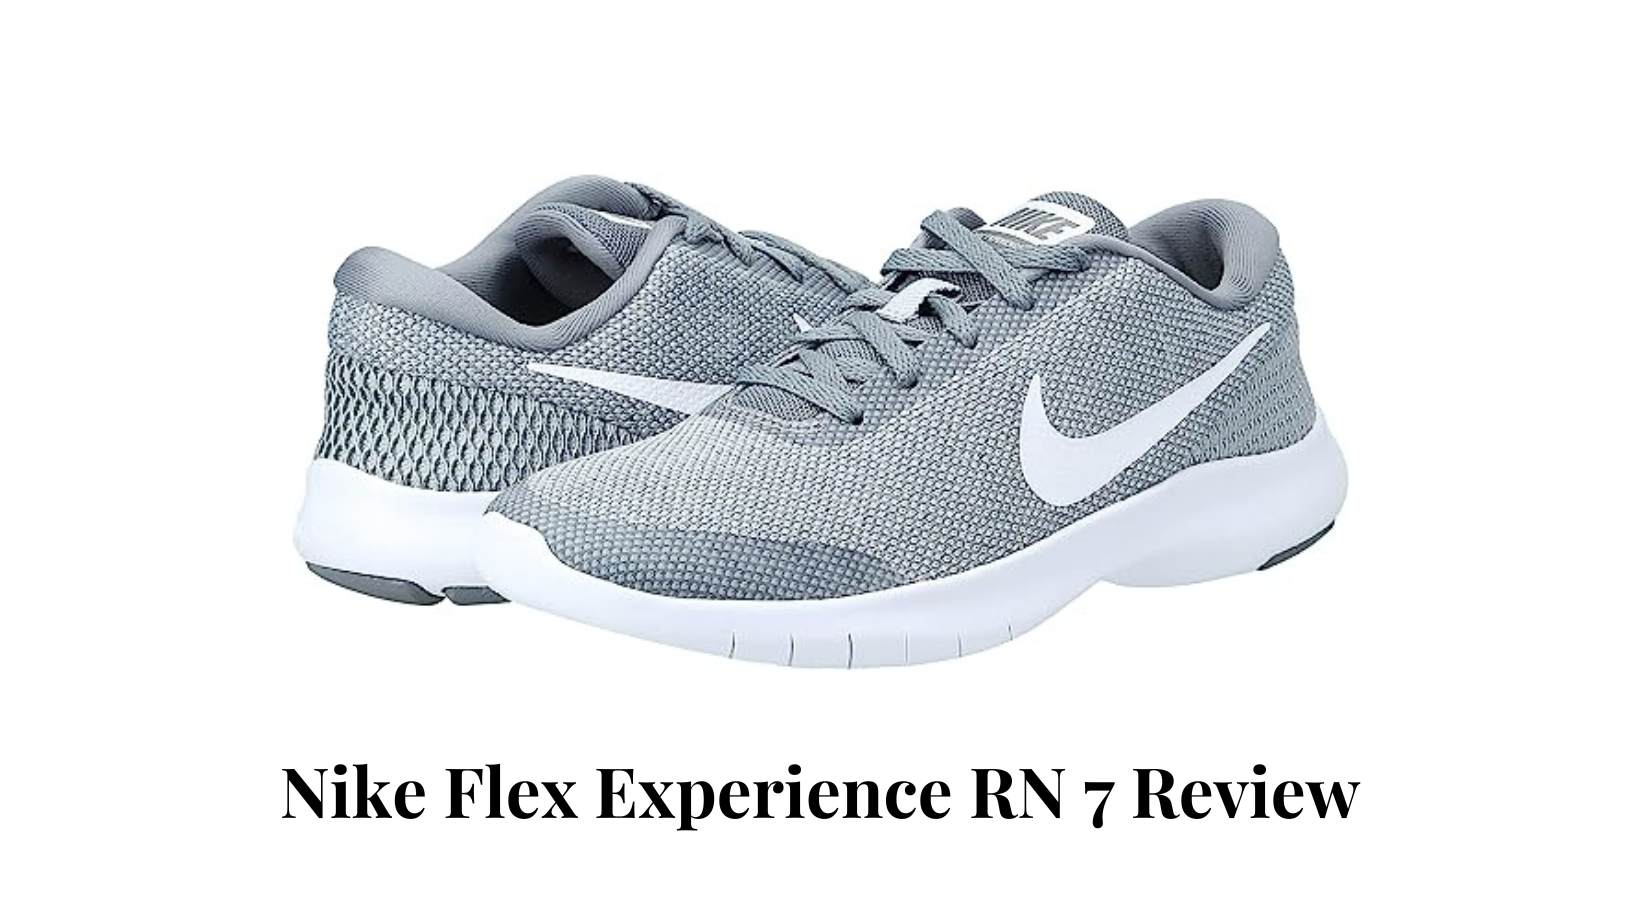 Nike Flex Experience RN 7 Review